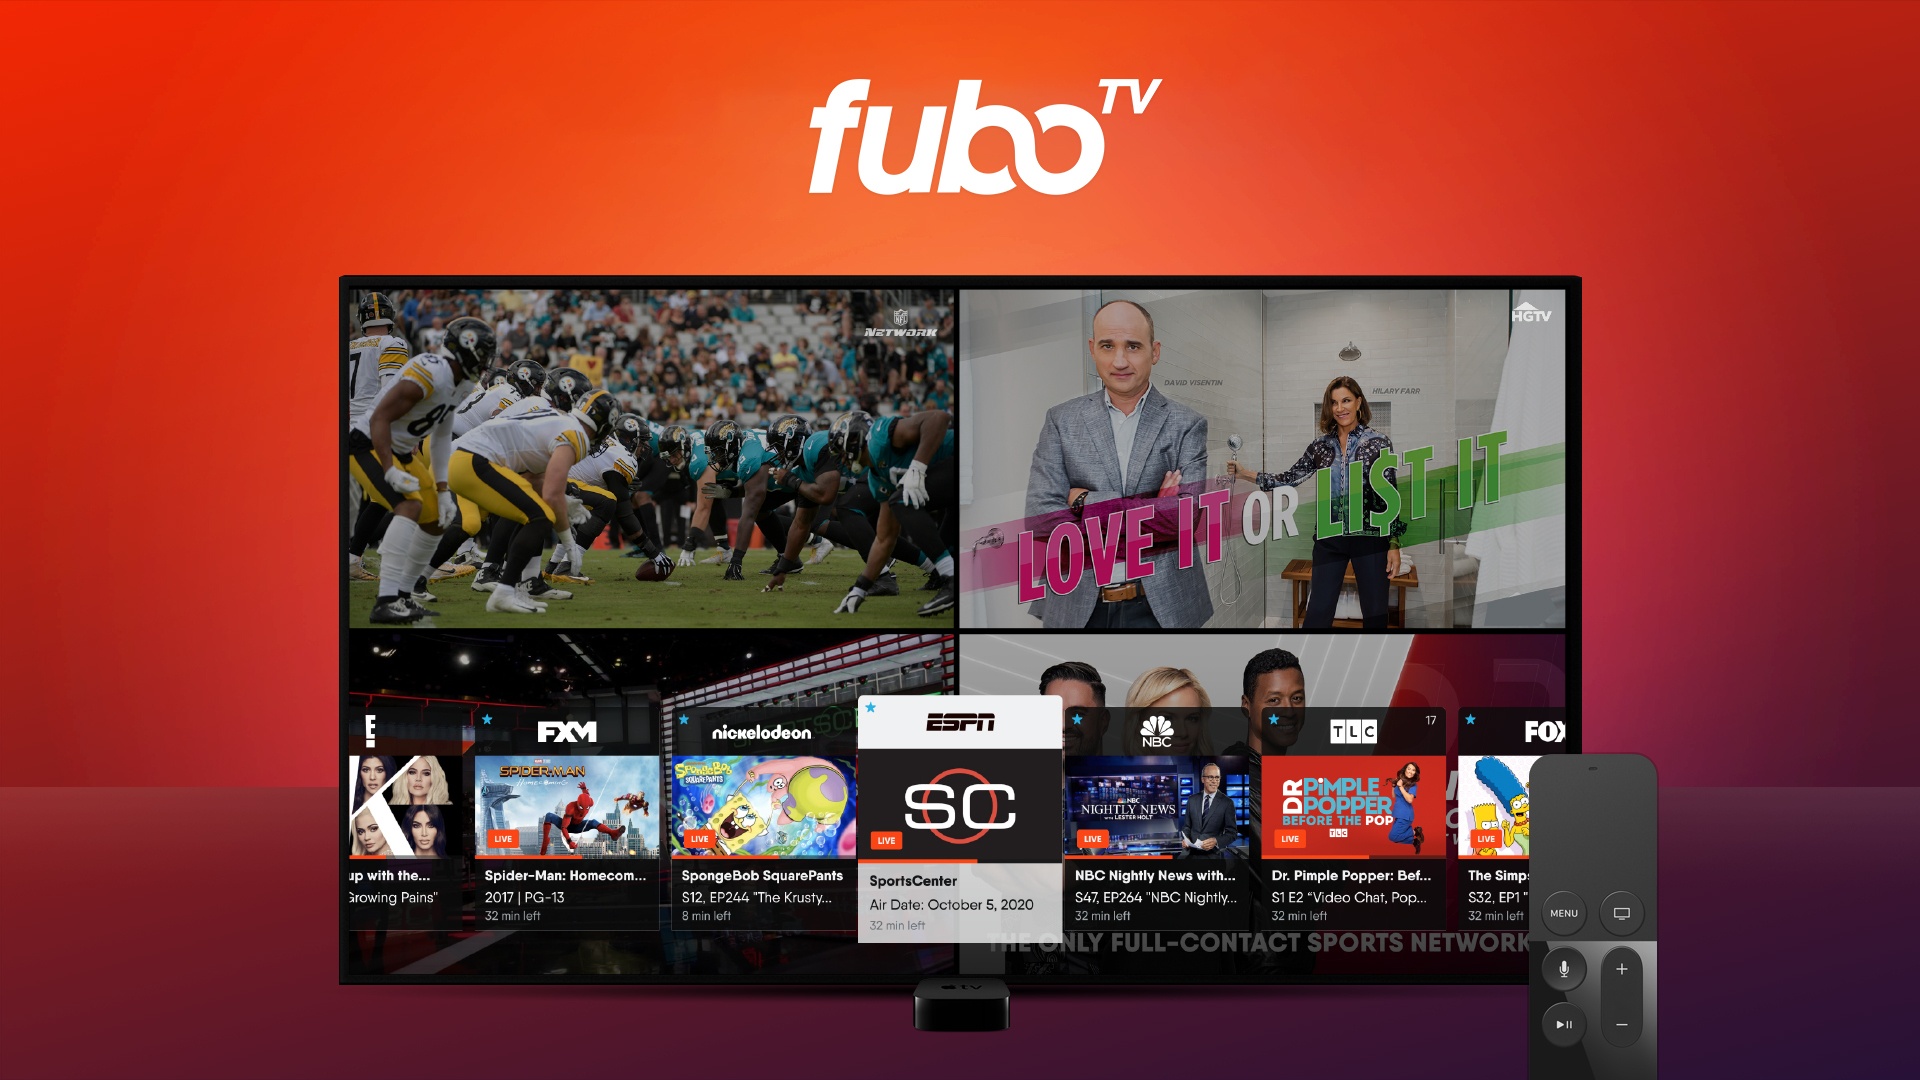 Deal Alert! Here’s How to Save $20 on Your First Two Months of Fubo